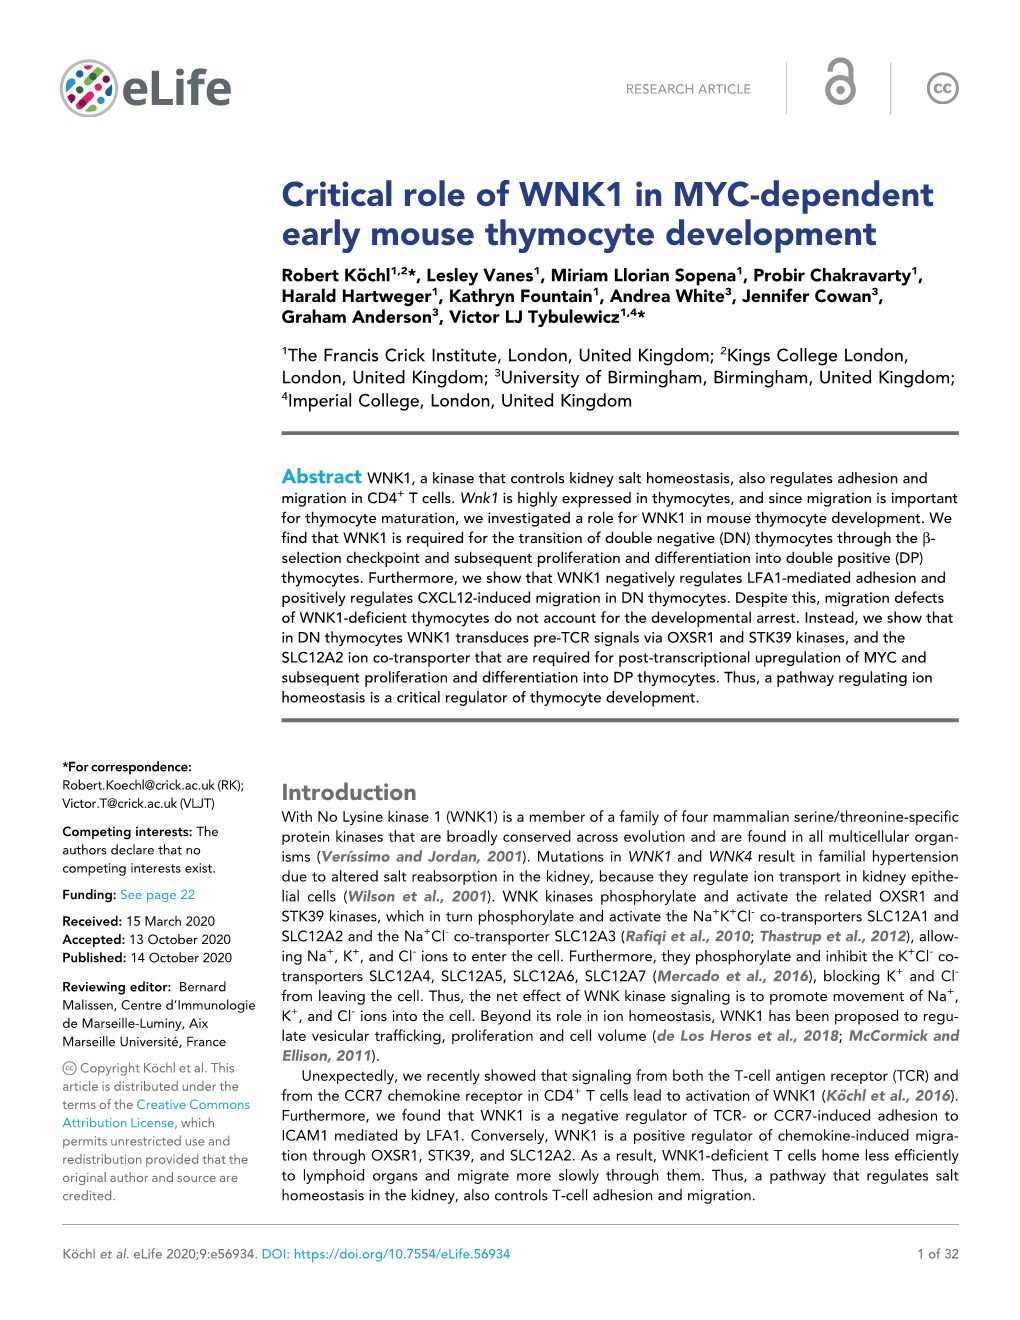 Critical Role of WNK1 in MYC-Dependent Early Mouse